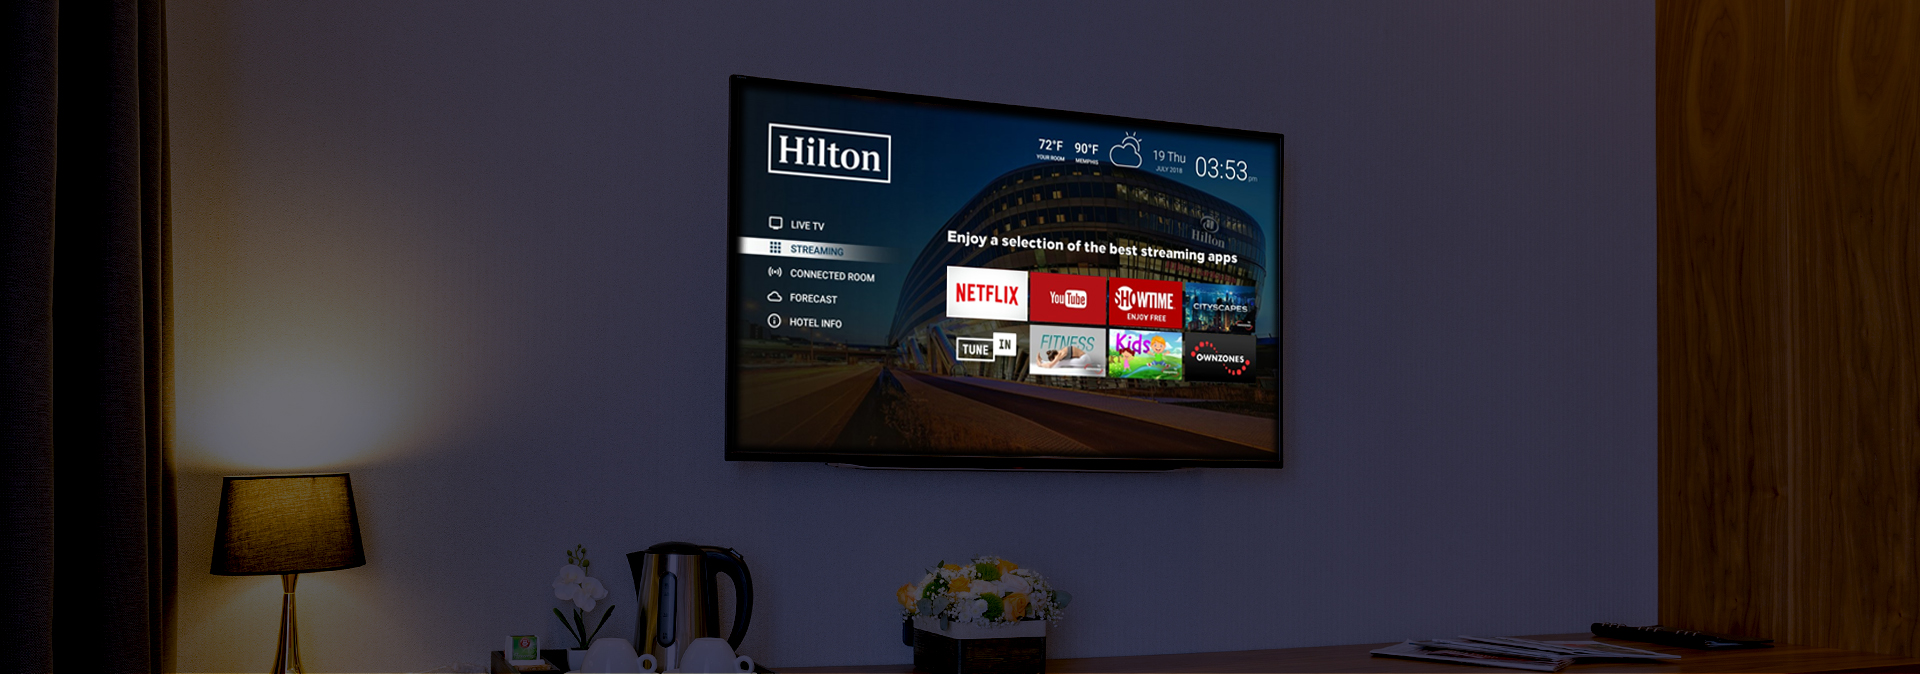 Netflix is Coming to Hilton Hotels